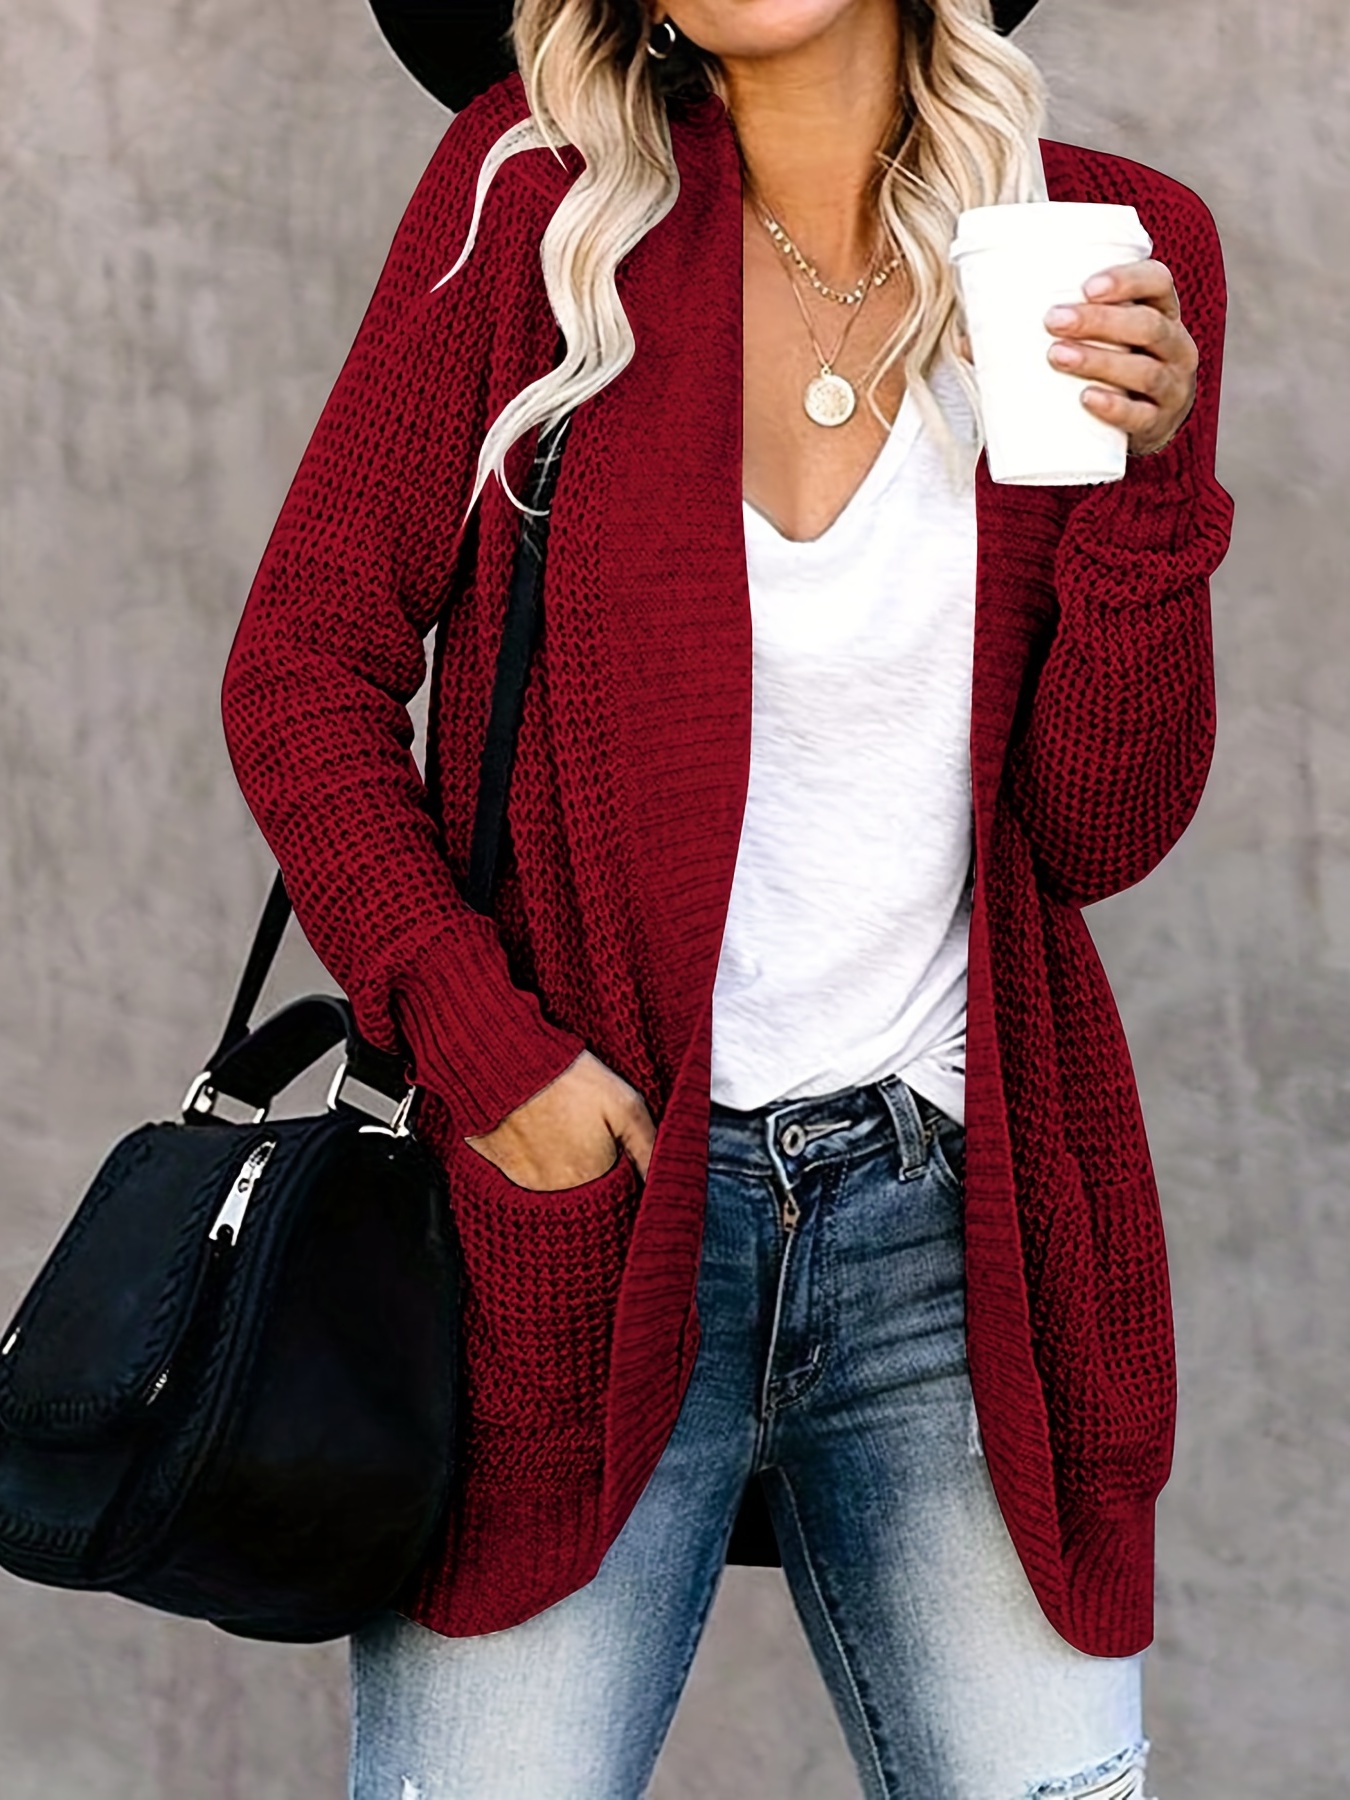  Womens Shrugs and Cardigans Cardigans for Women 2023 Peach  Cardigan for Women Womens Waffle Knit Tops Long Sleeve Wholesale Clothing  Items for Resale Bulk Cute Stuff Under 5 Dollars top Deals